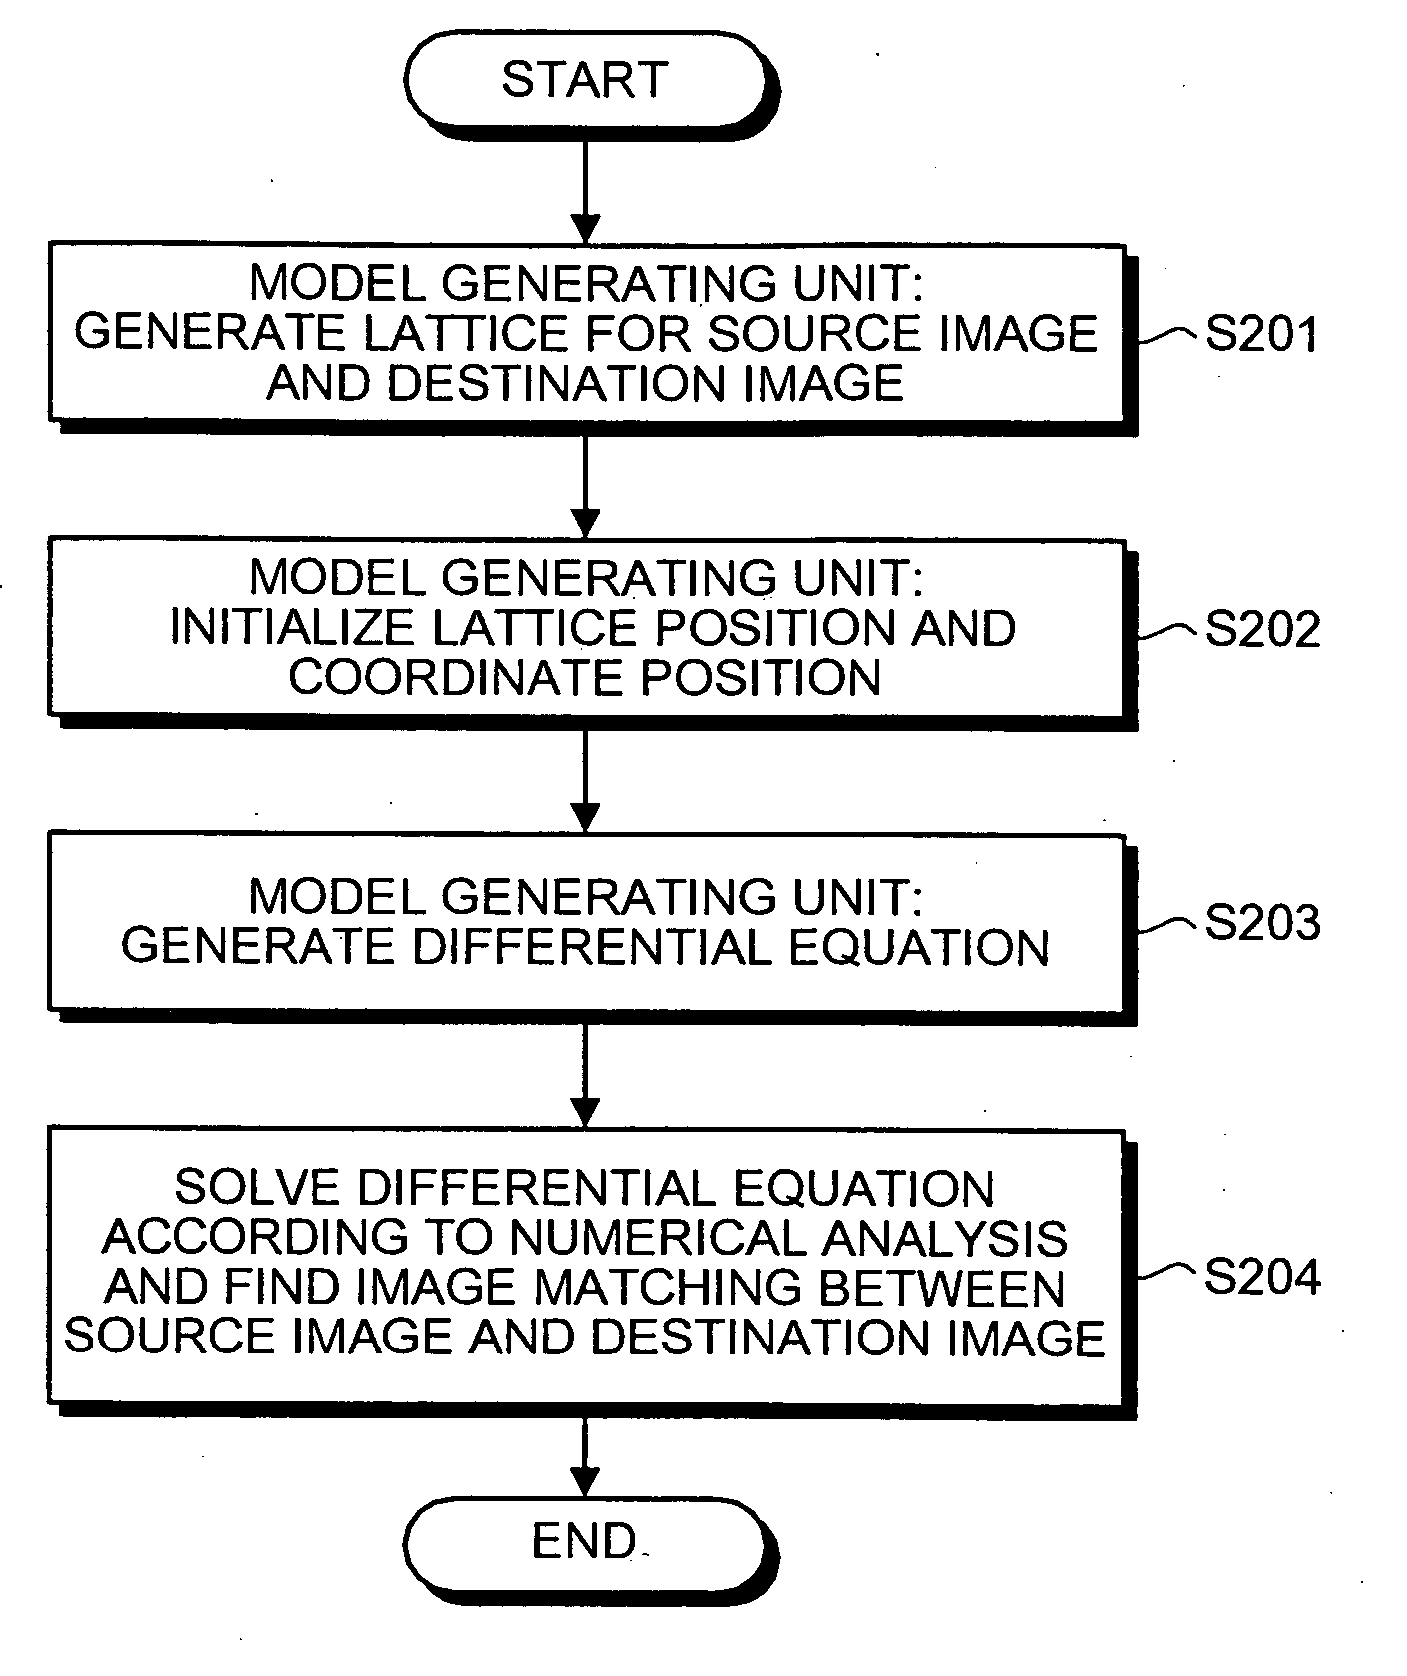 Image matching apparatus, method of matching images, and computer program product